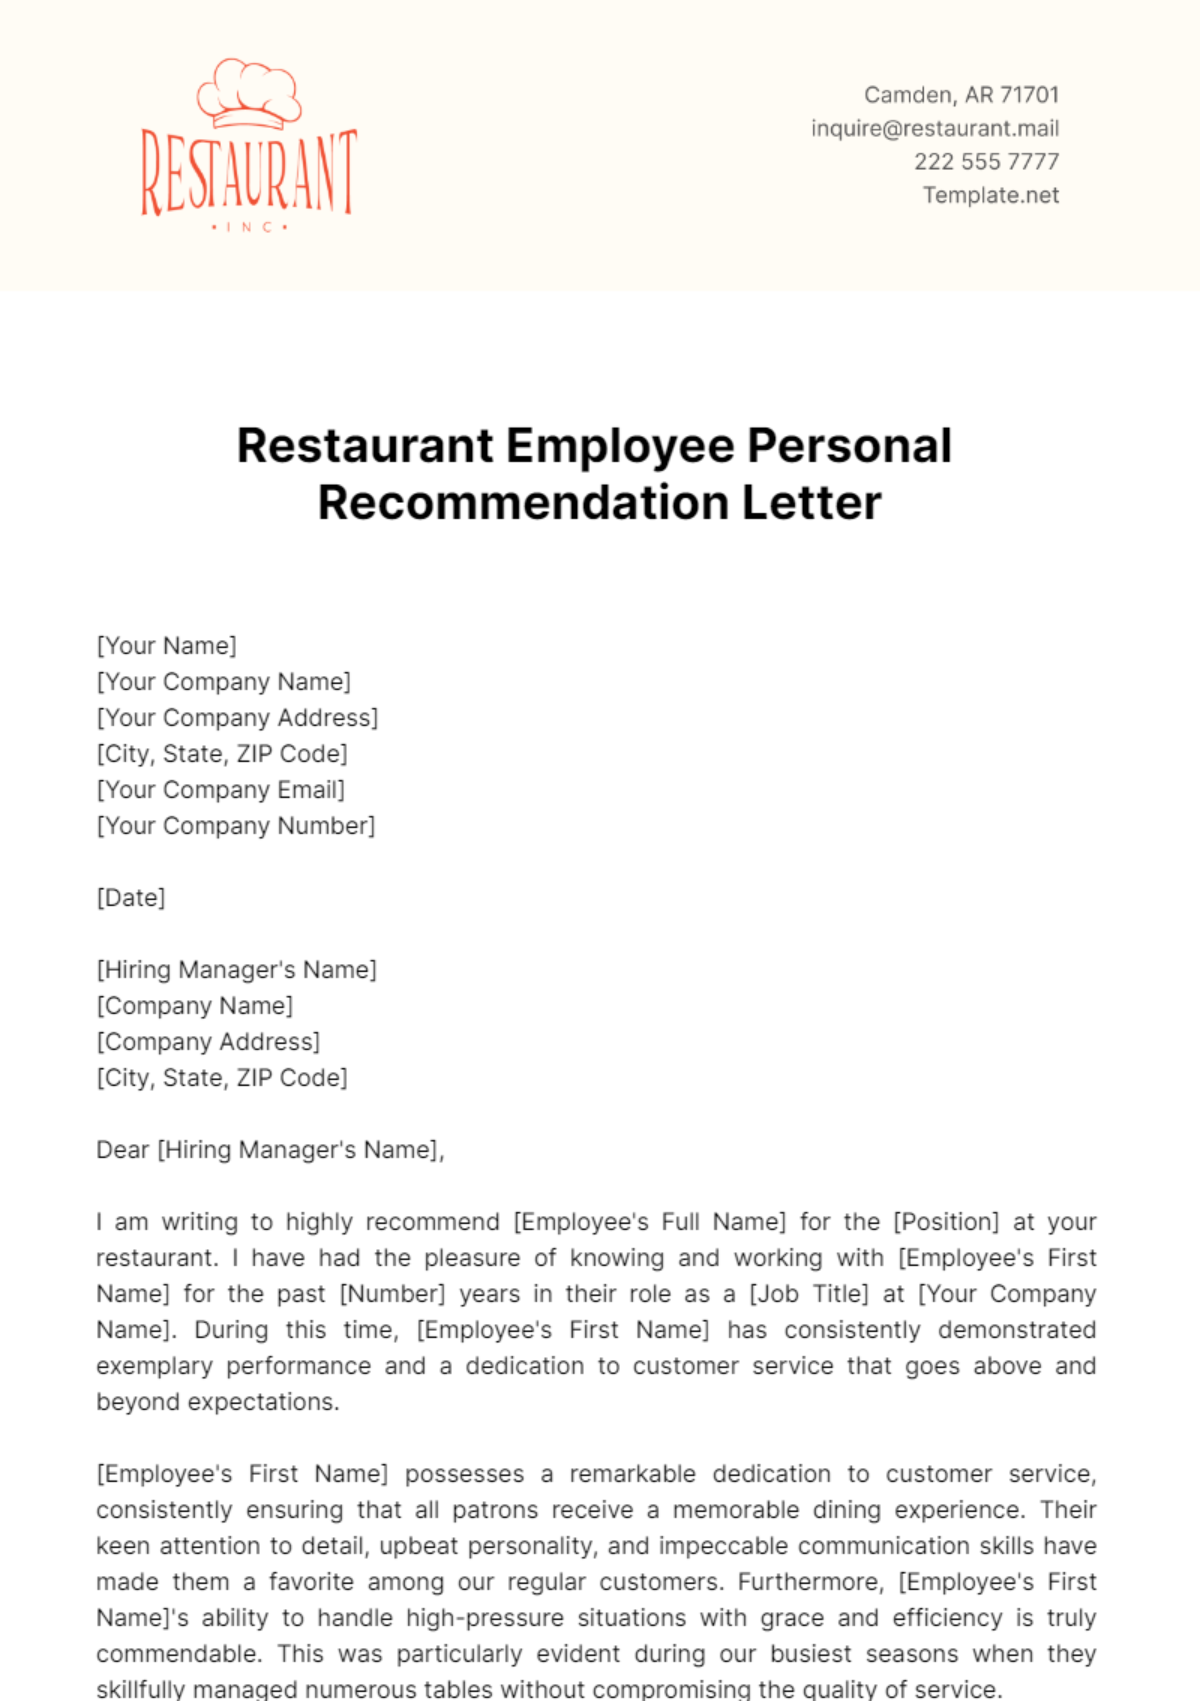 Free Restaurant Employee Personal Recommendation Letter Template